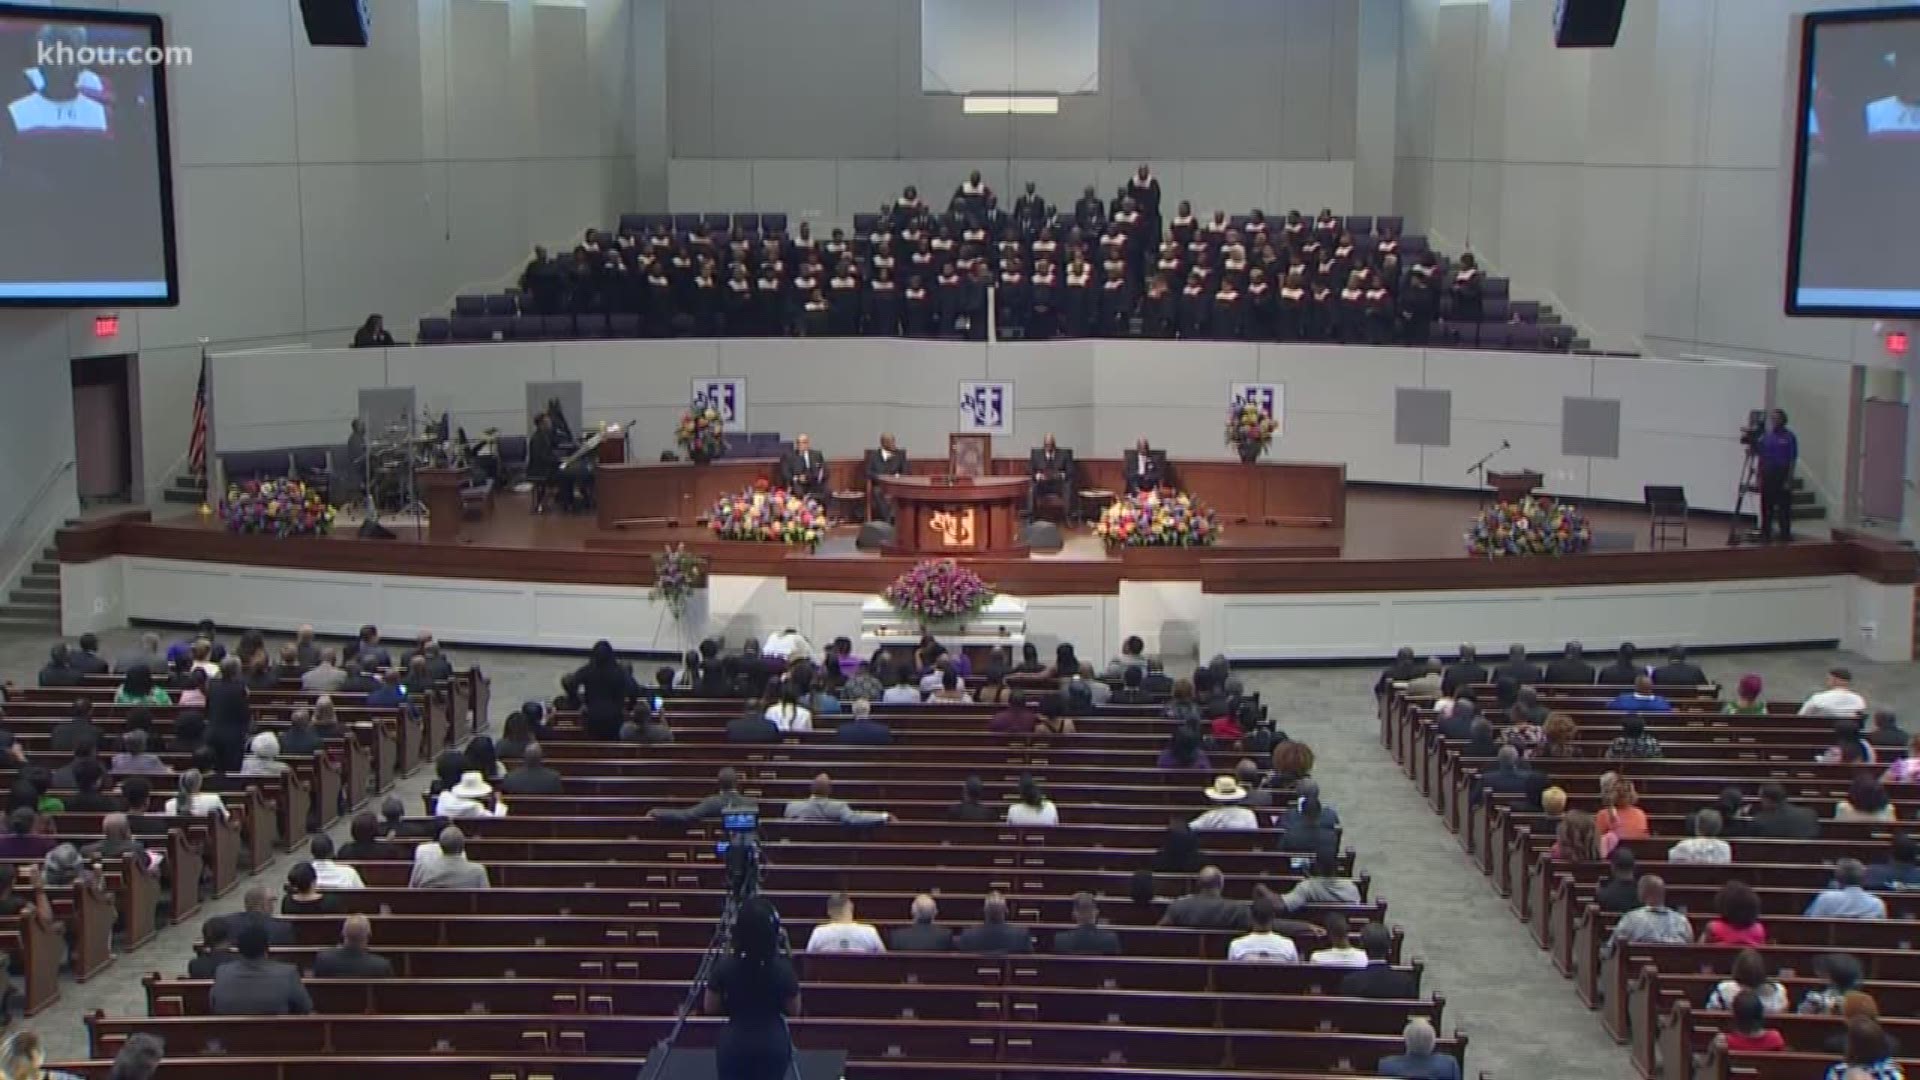 Friends and family said goodbye Thursday to Pamela Turner, the woman shot and killed by a Baytown police officer.